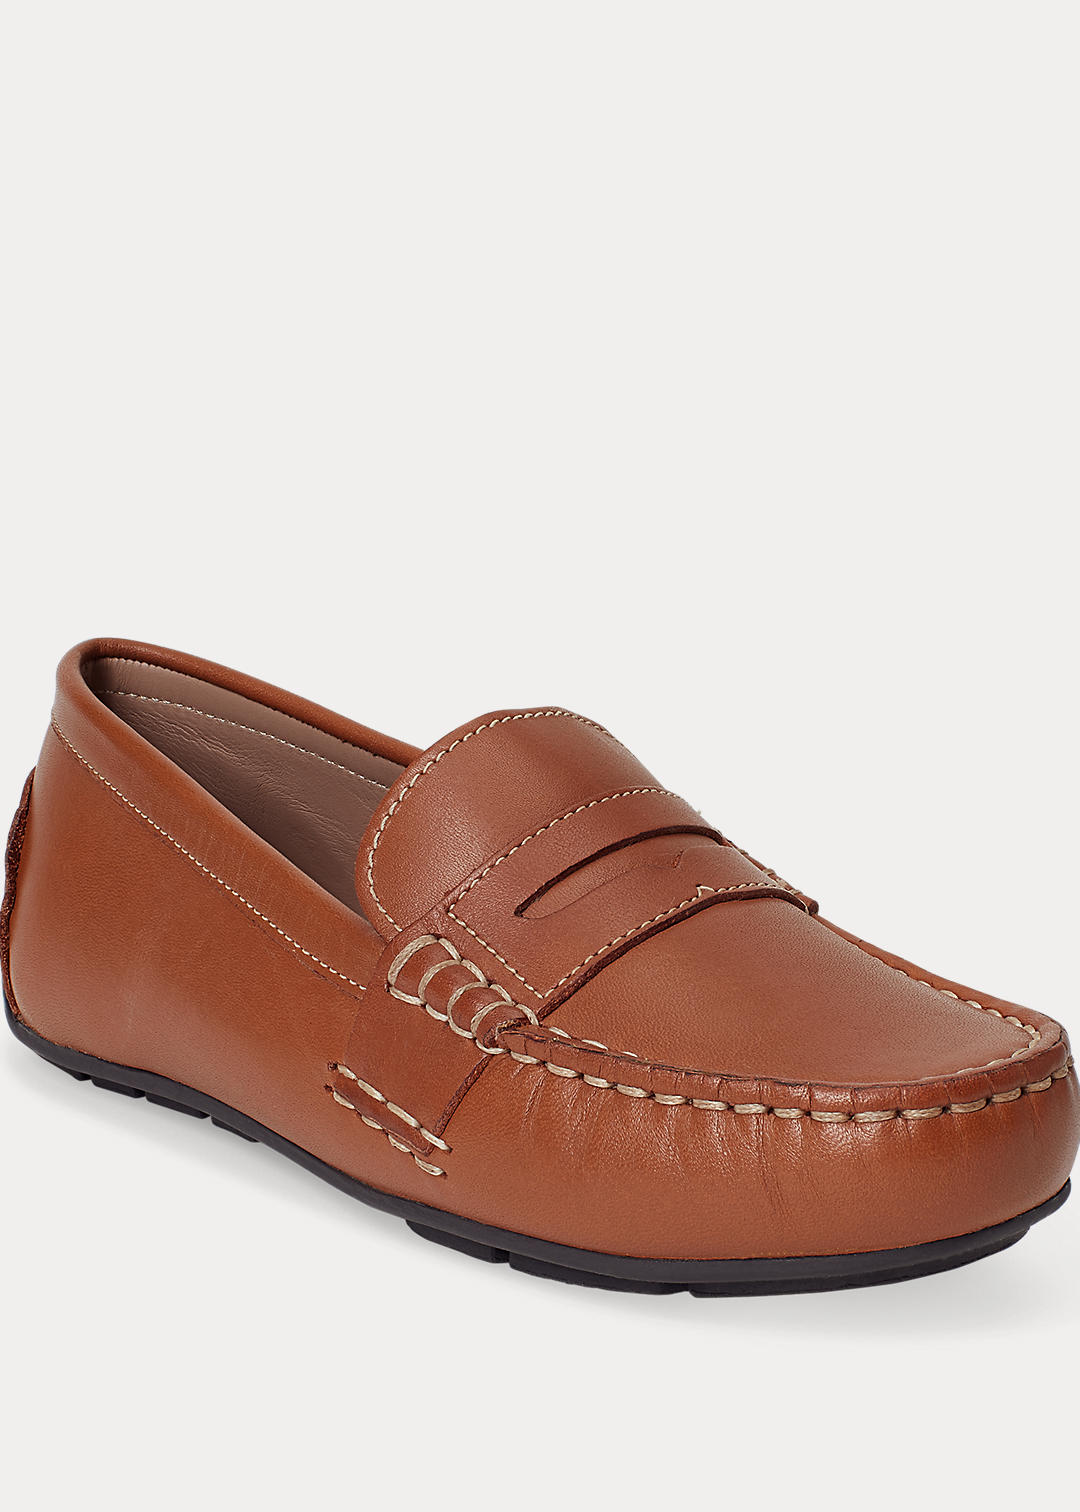 BOYS 1.5-6 YEARS Telly Leather Penny Loafer 2